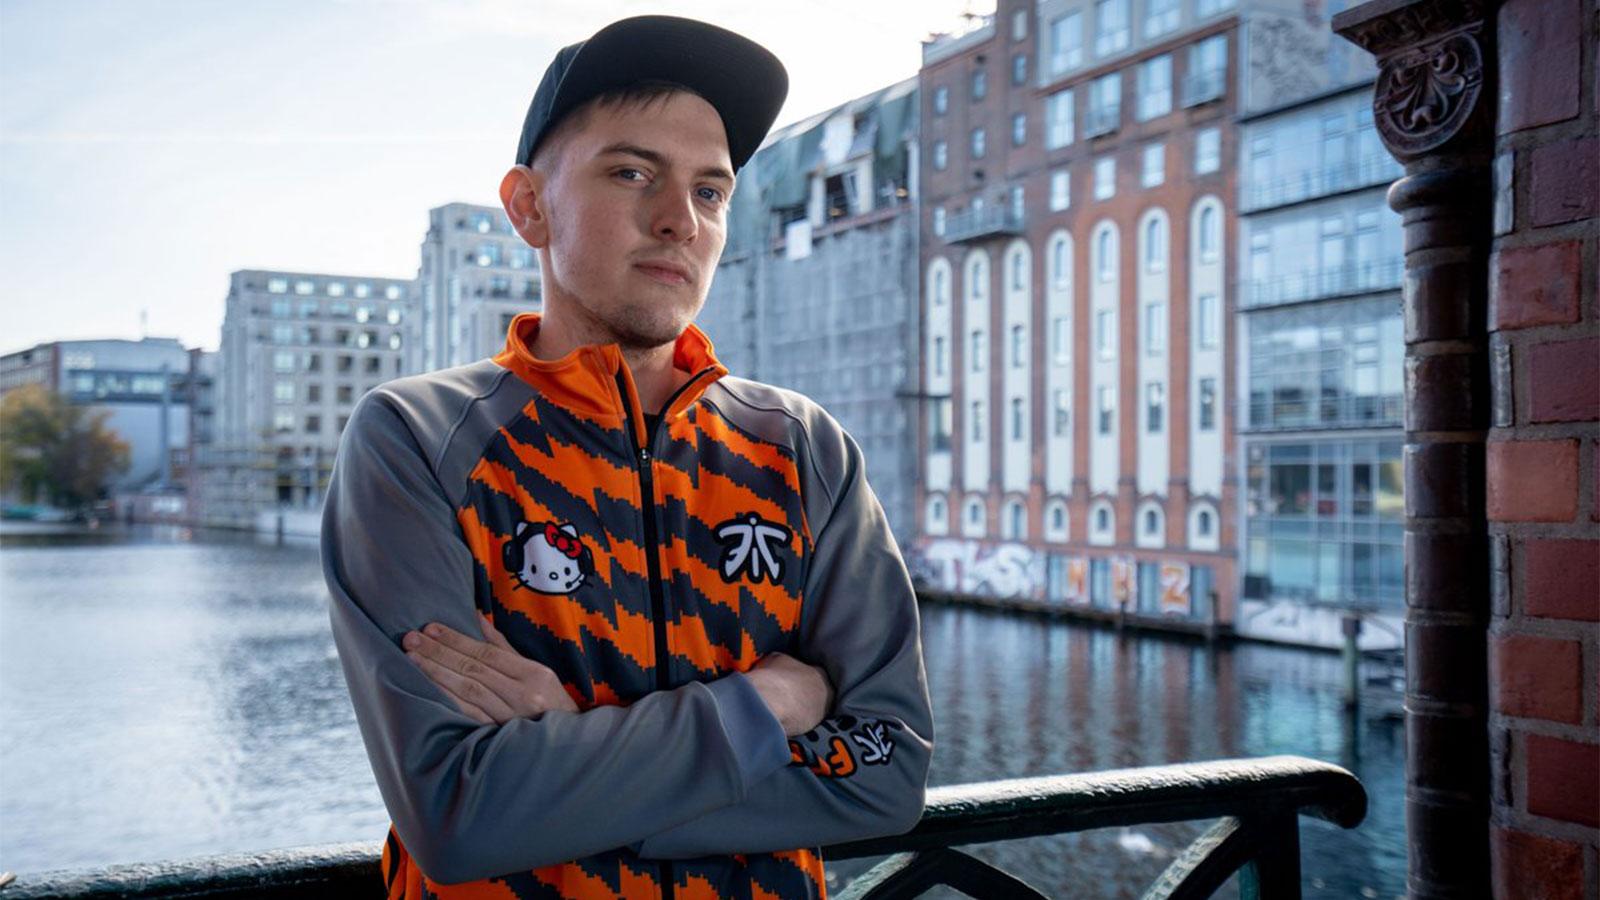 Selfmade LEC Fnatic not done yet